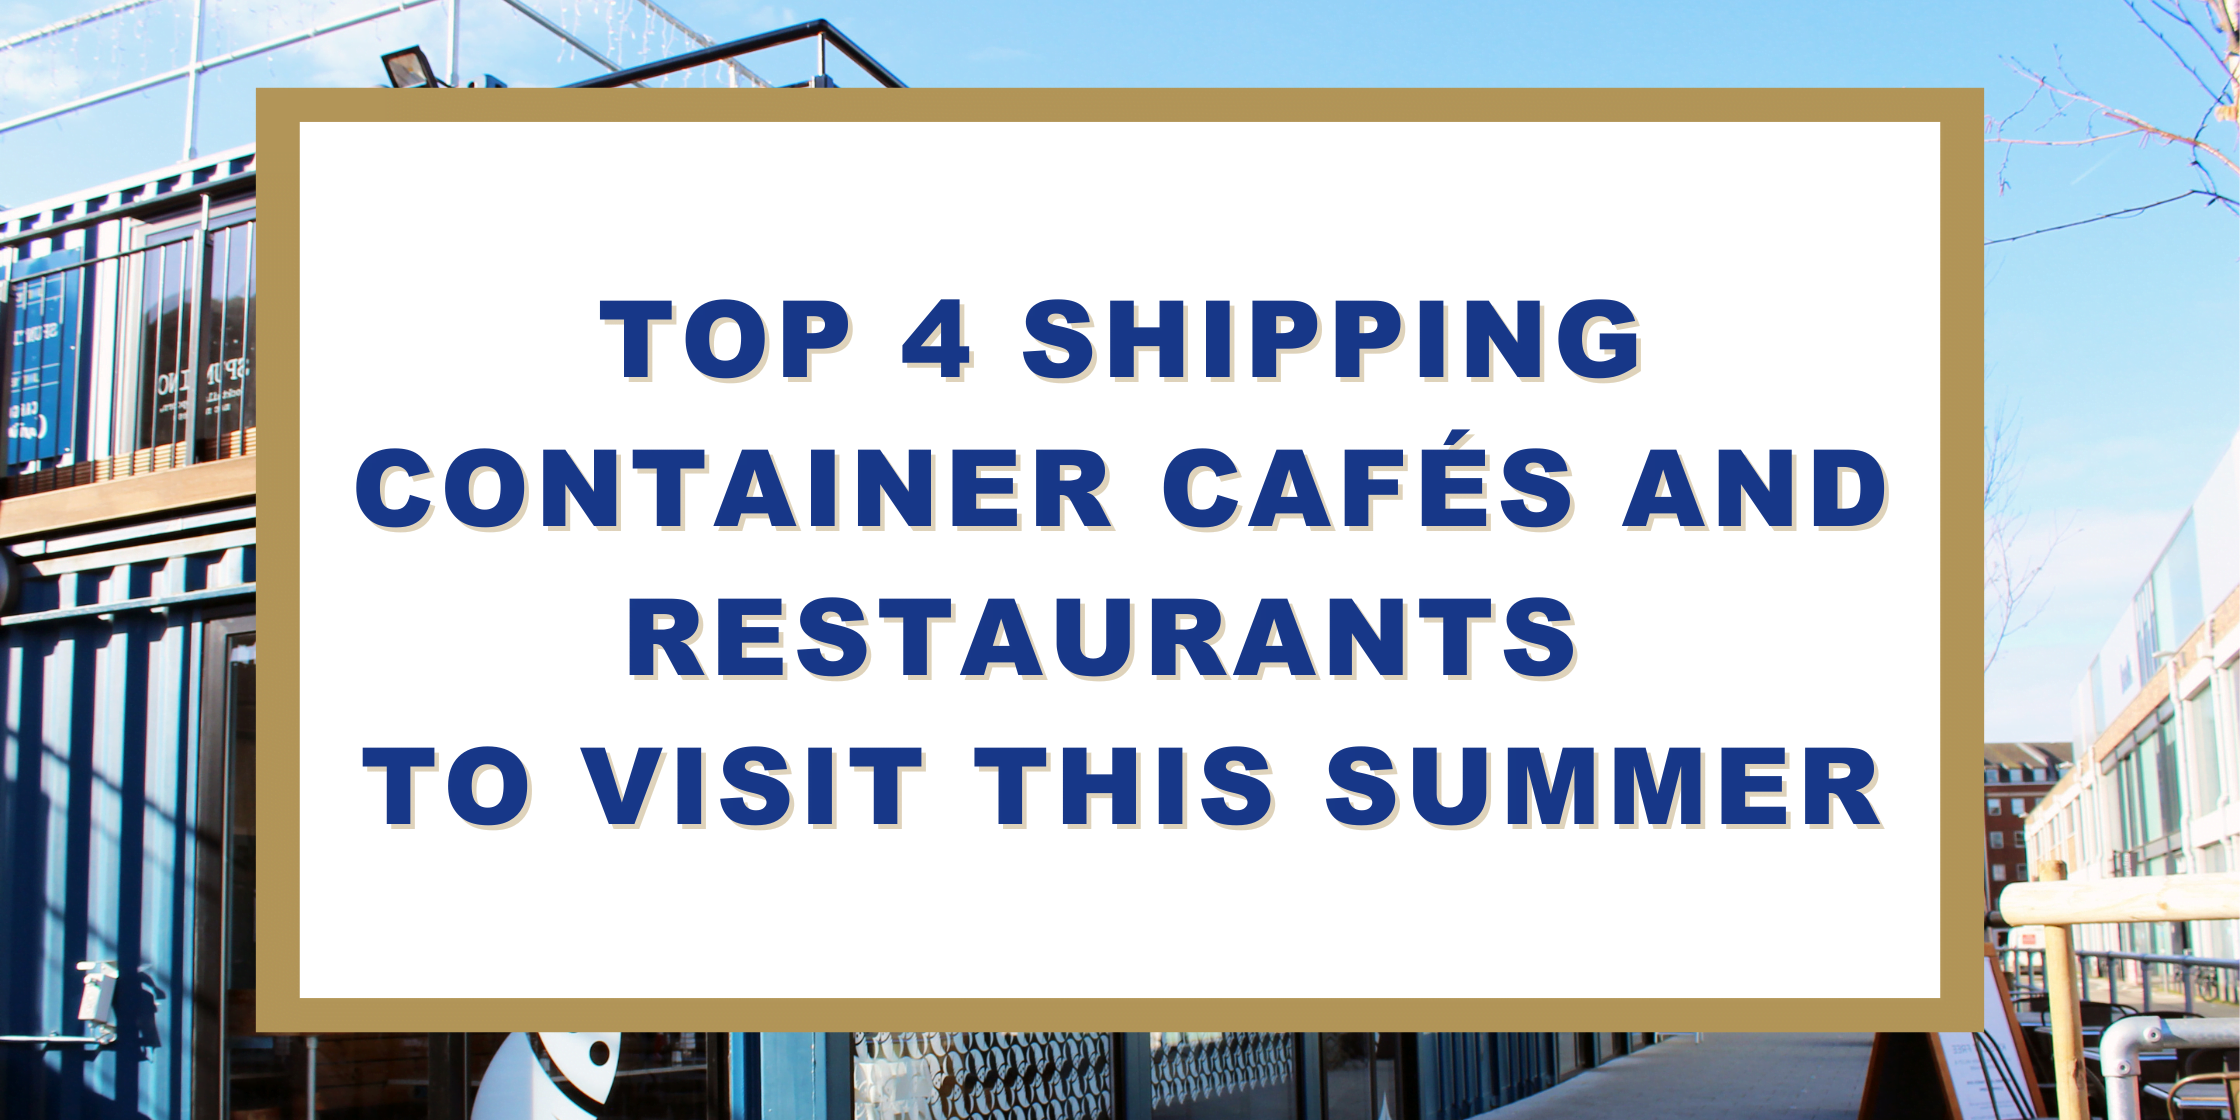 Top 4 Shipping Container Restaurants and Cafes to Visit This Summer